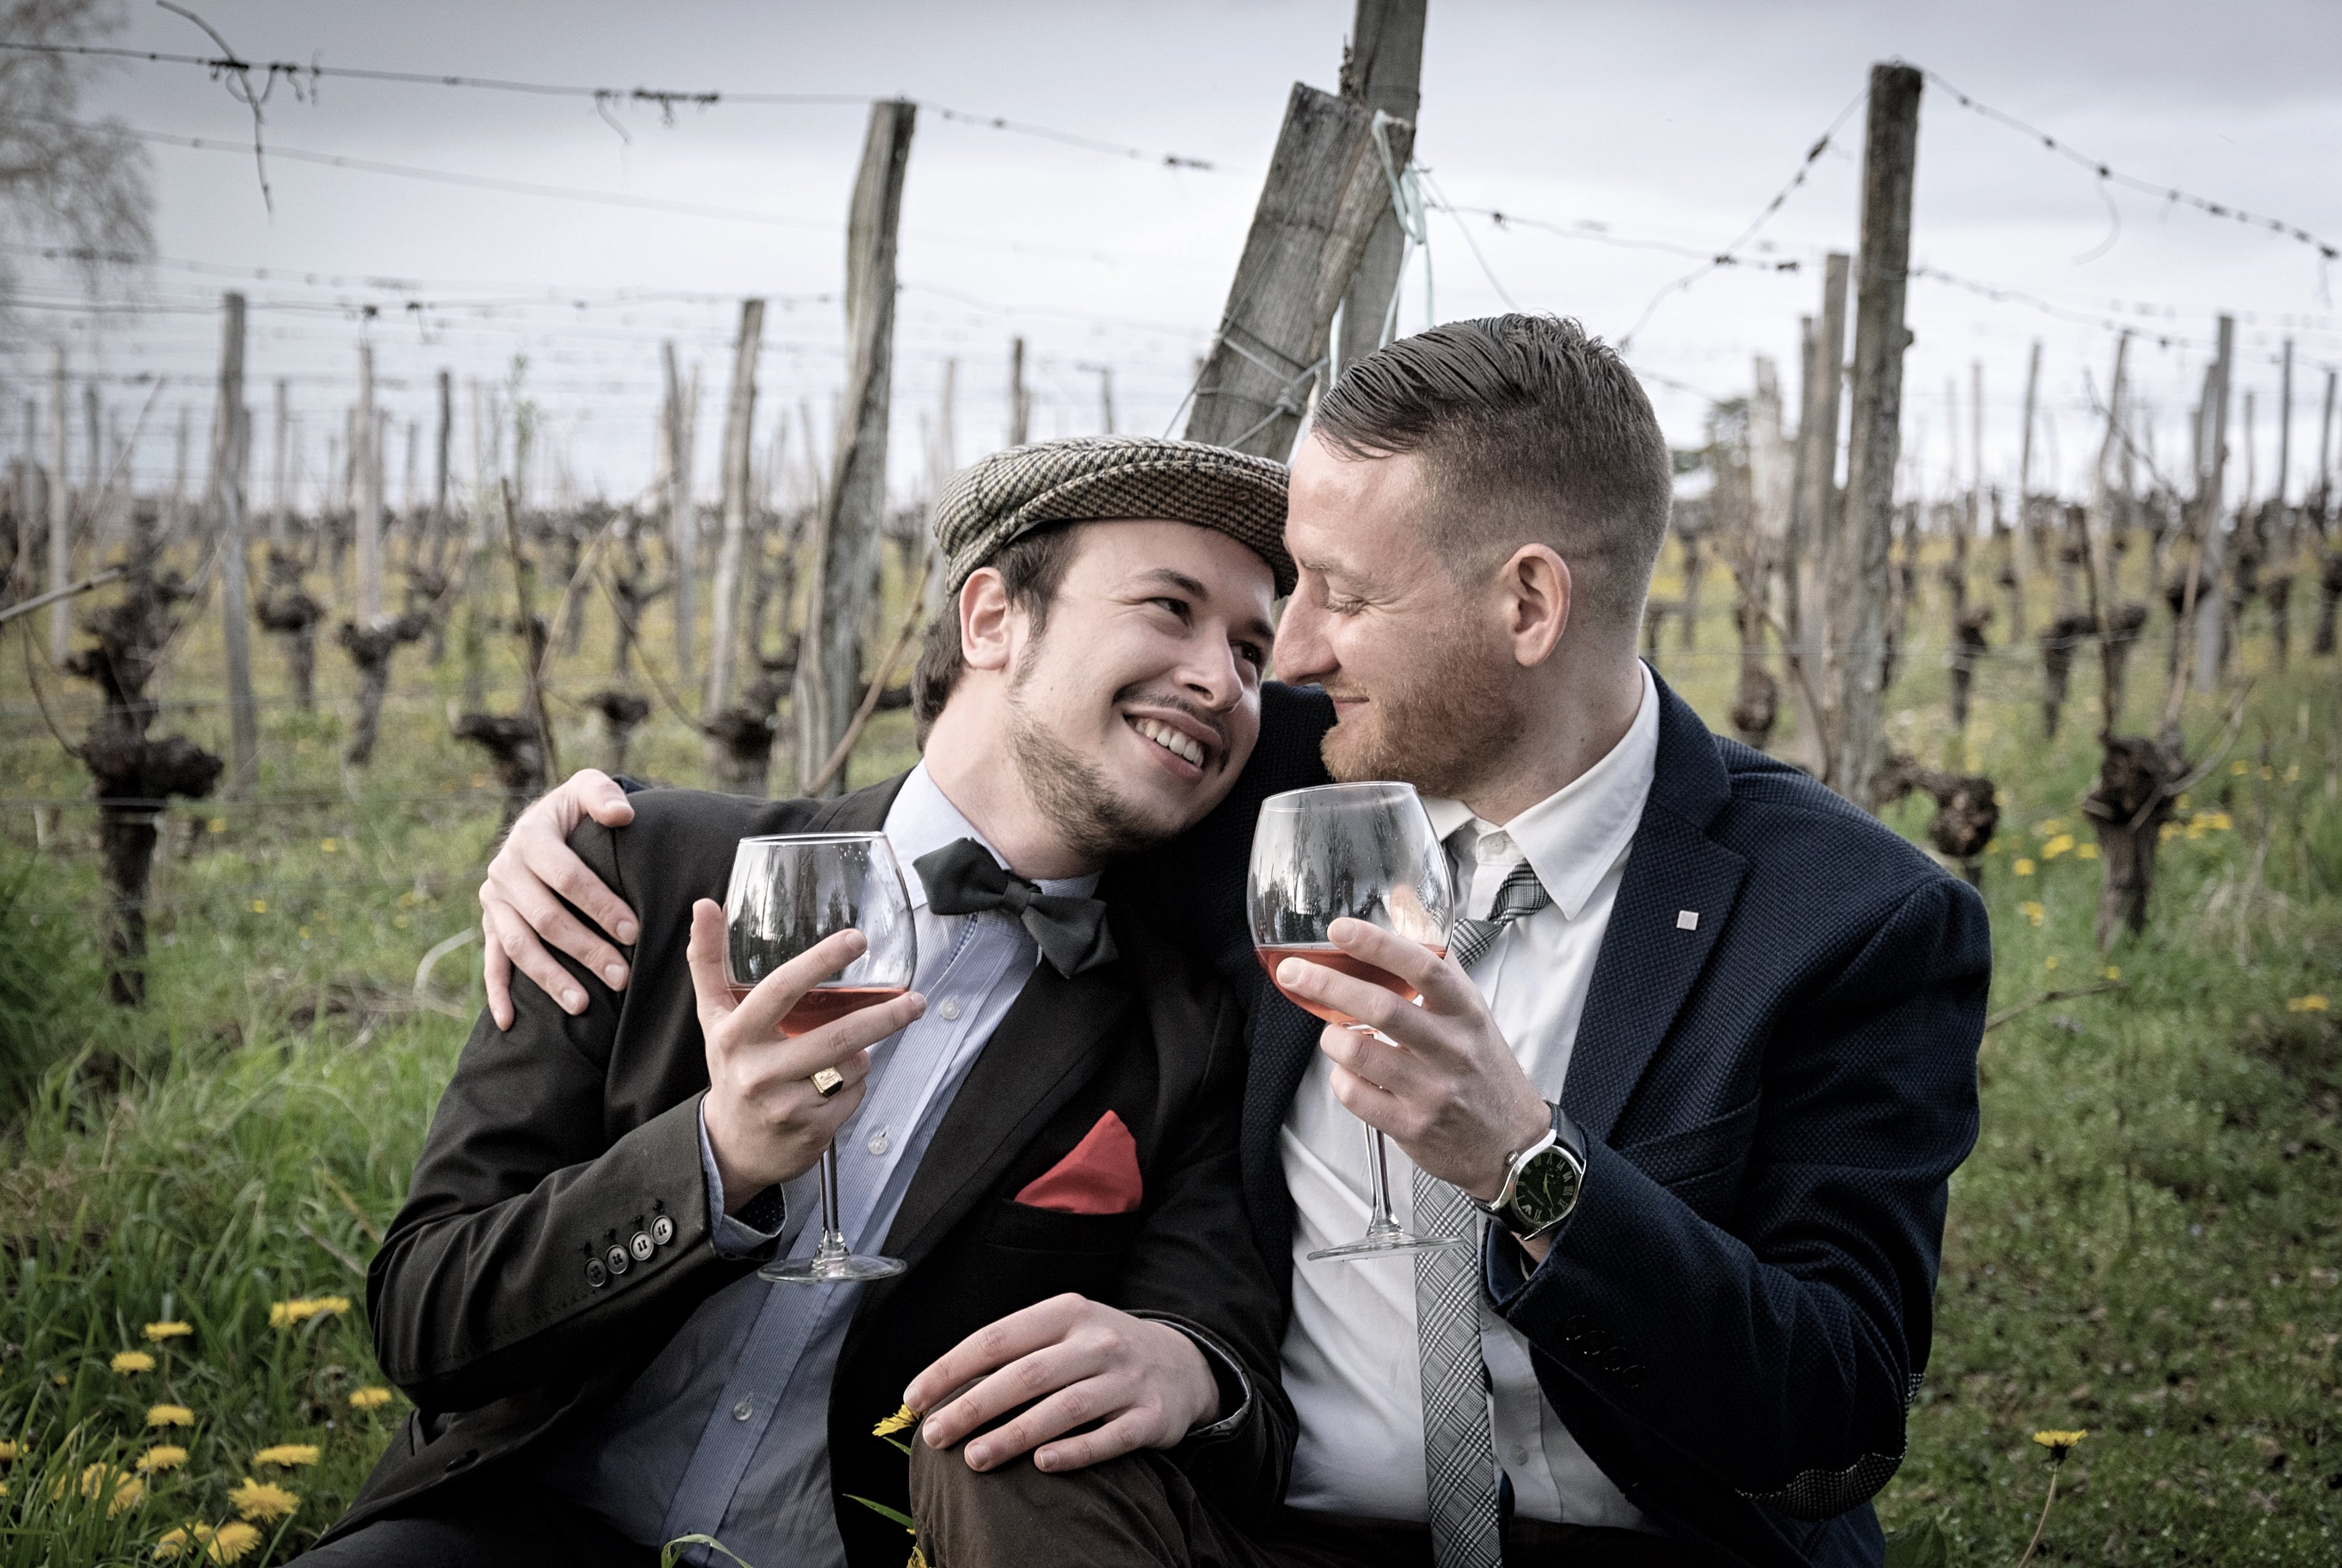 A couple embraces in a wine vinyard